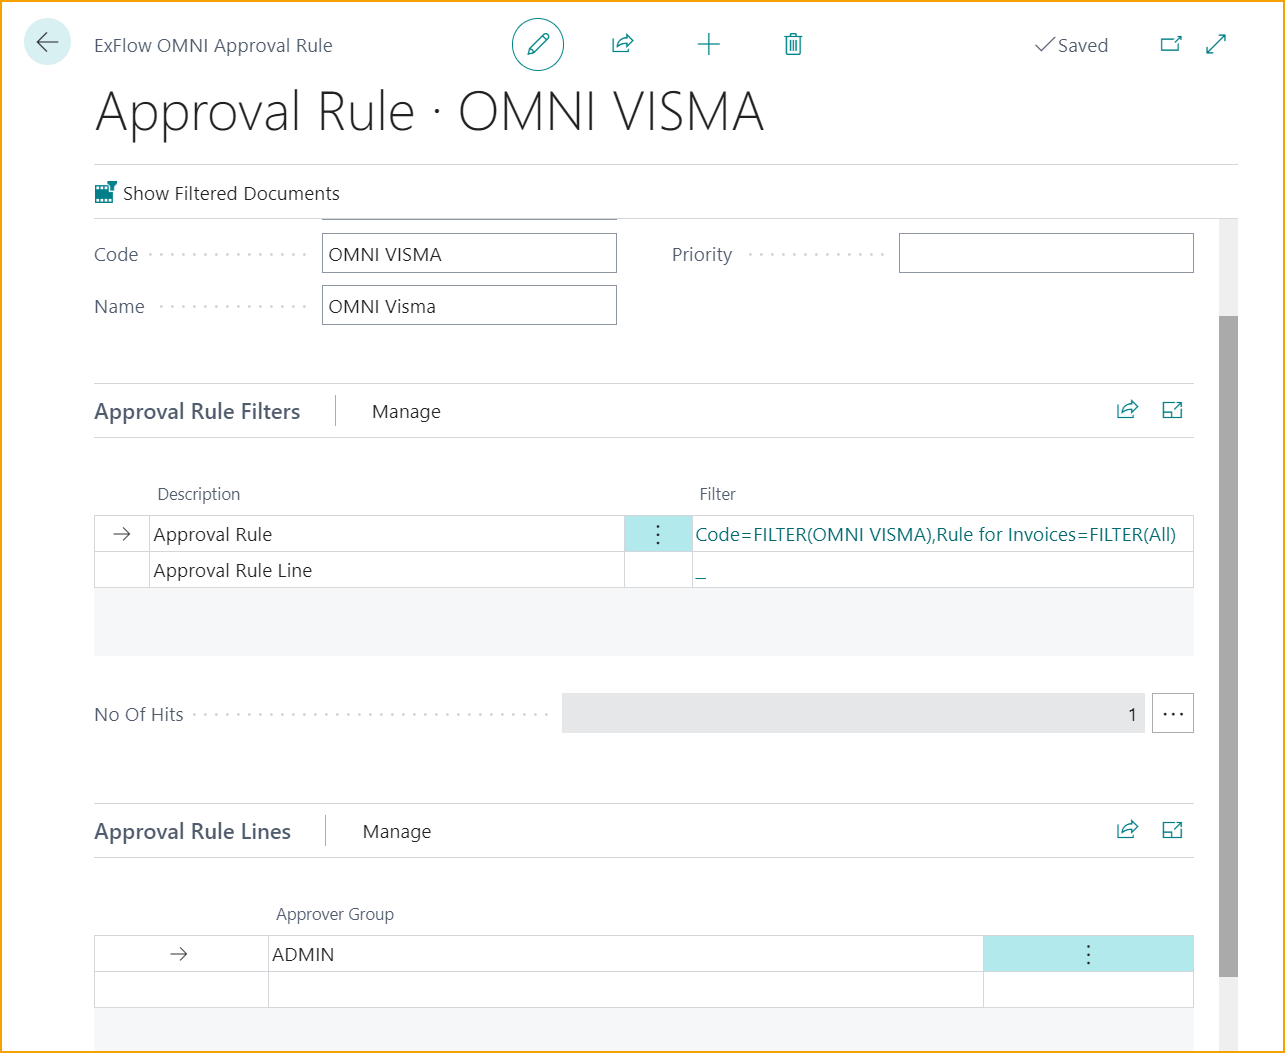 ExFlow OMNI Approval Rule